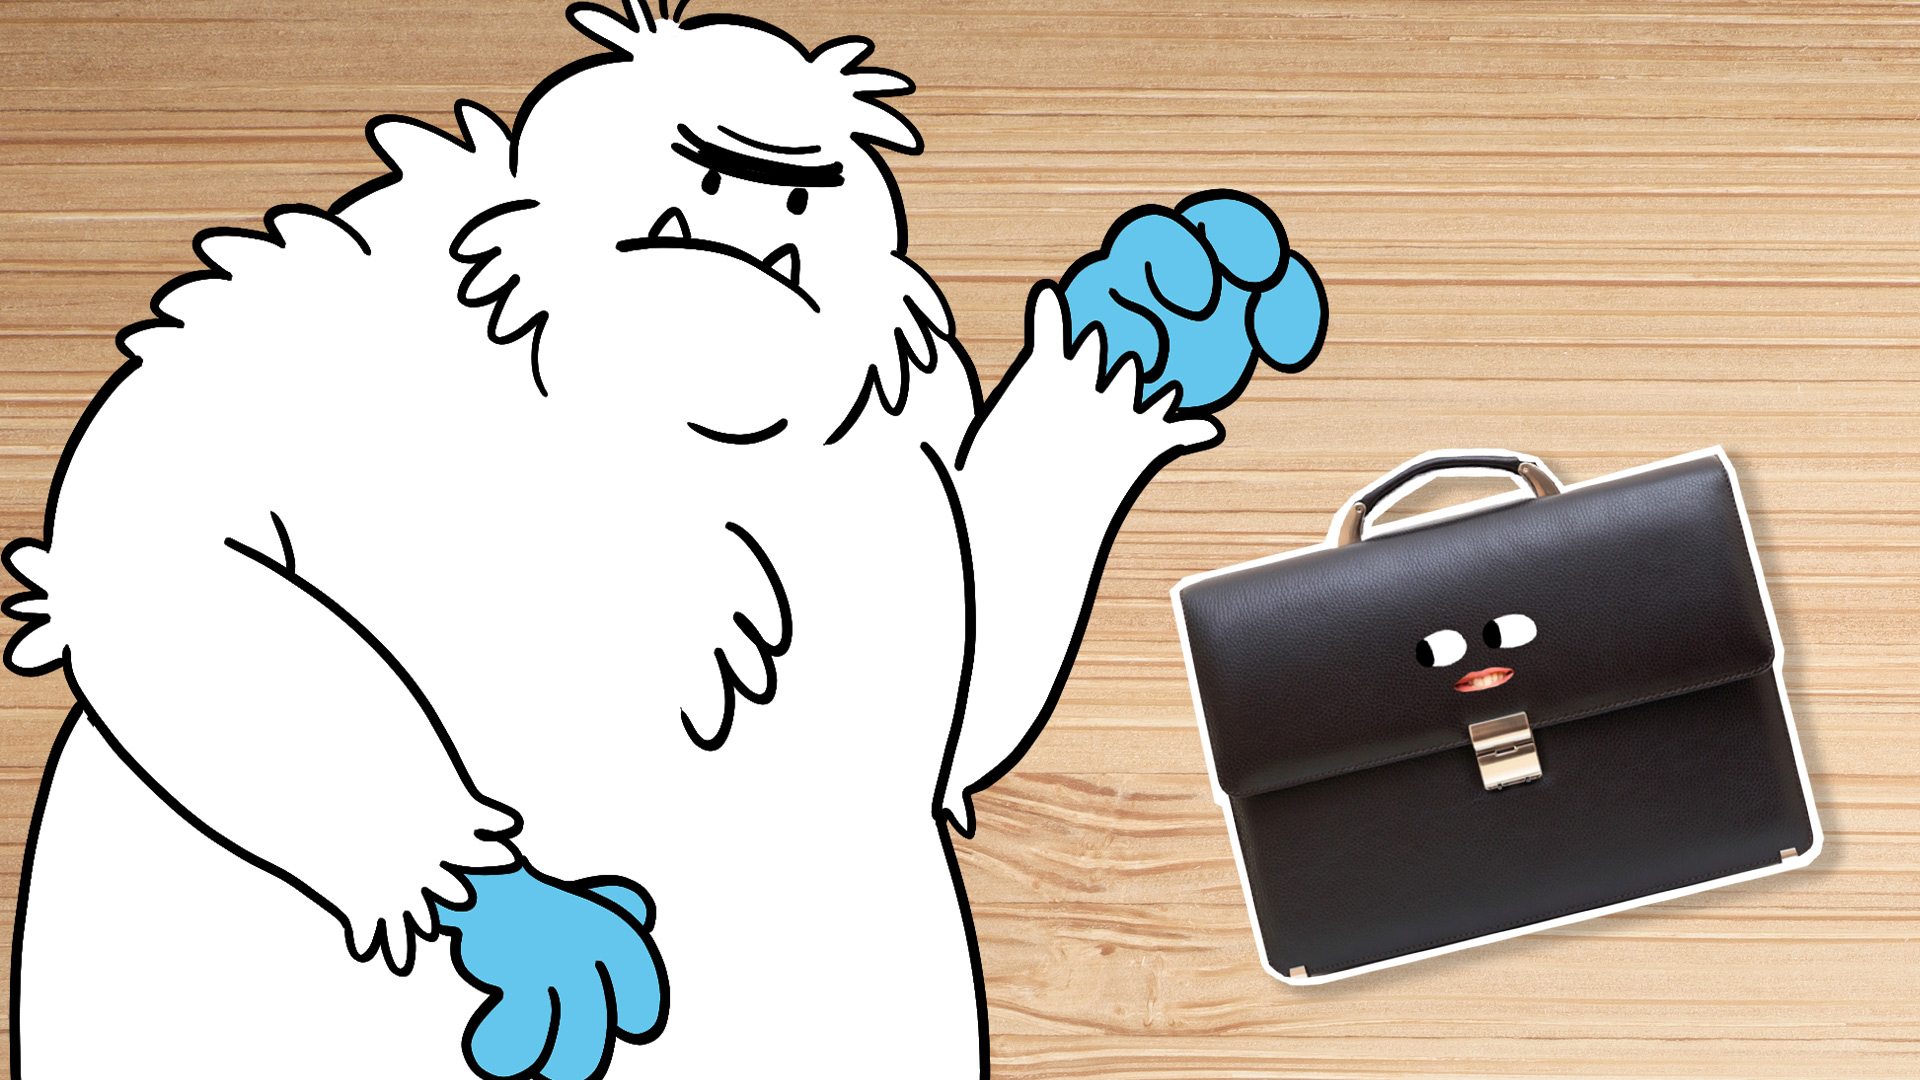 Abominable Snowmenace and a briefcase